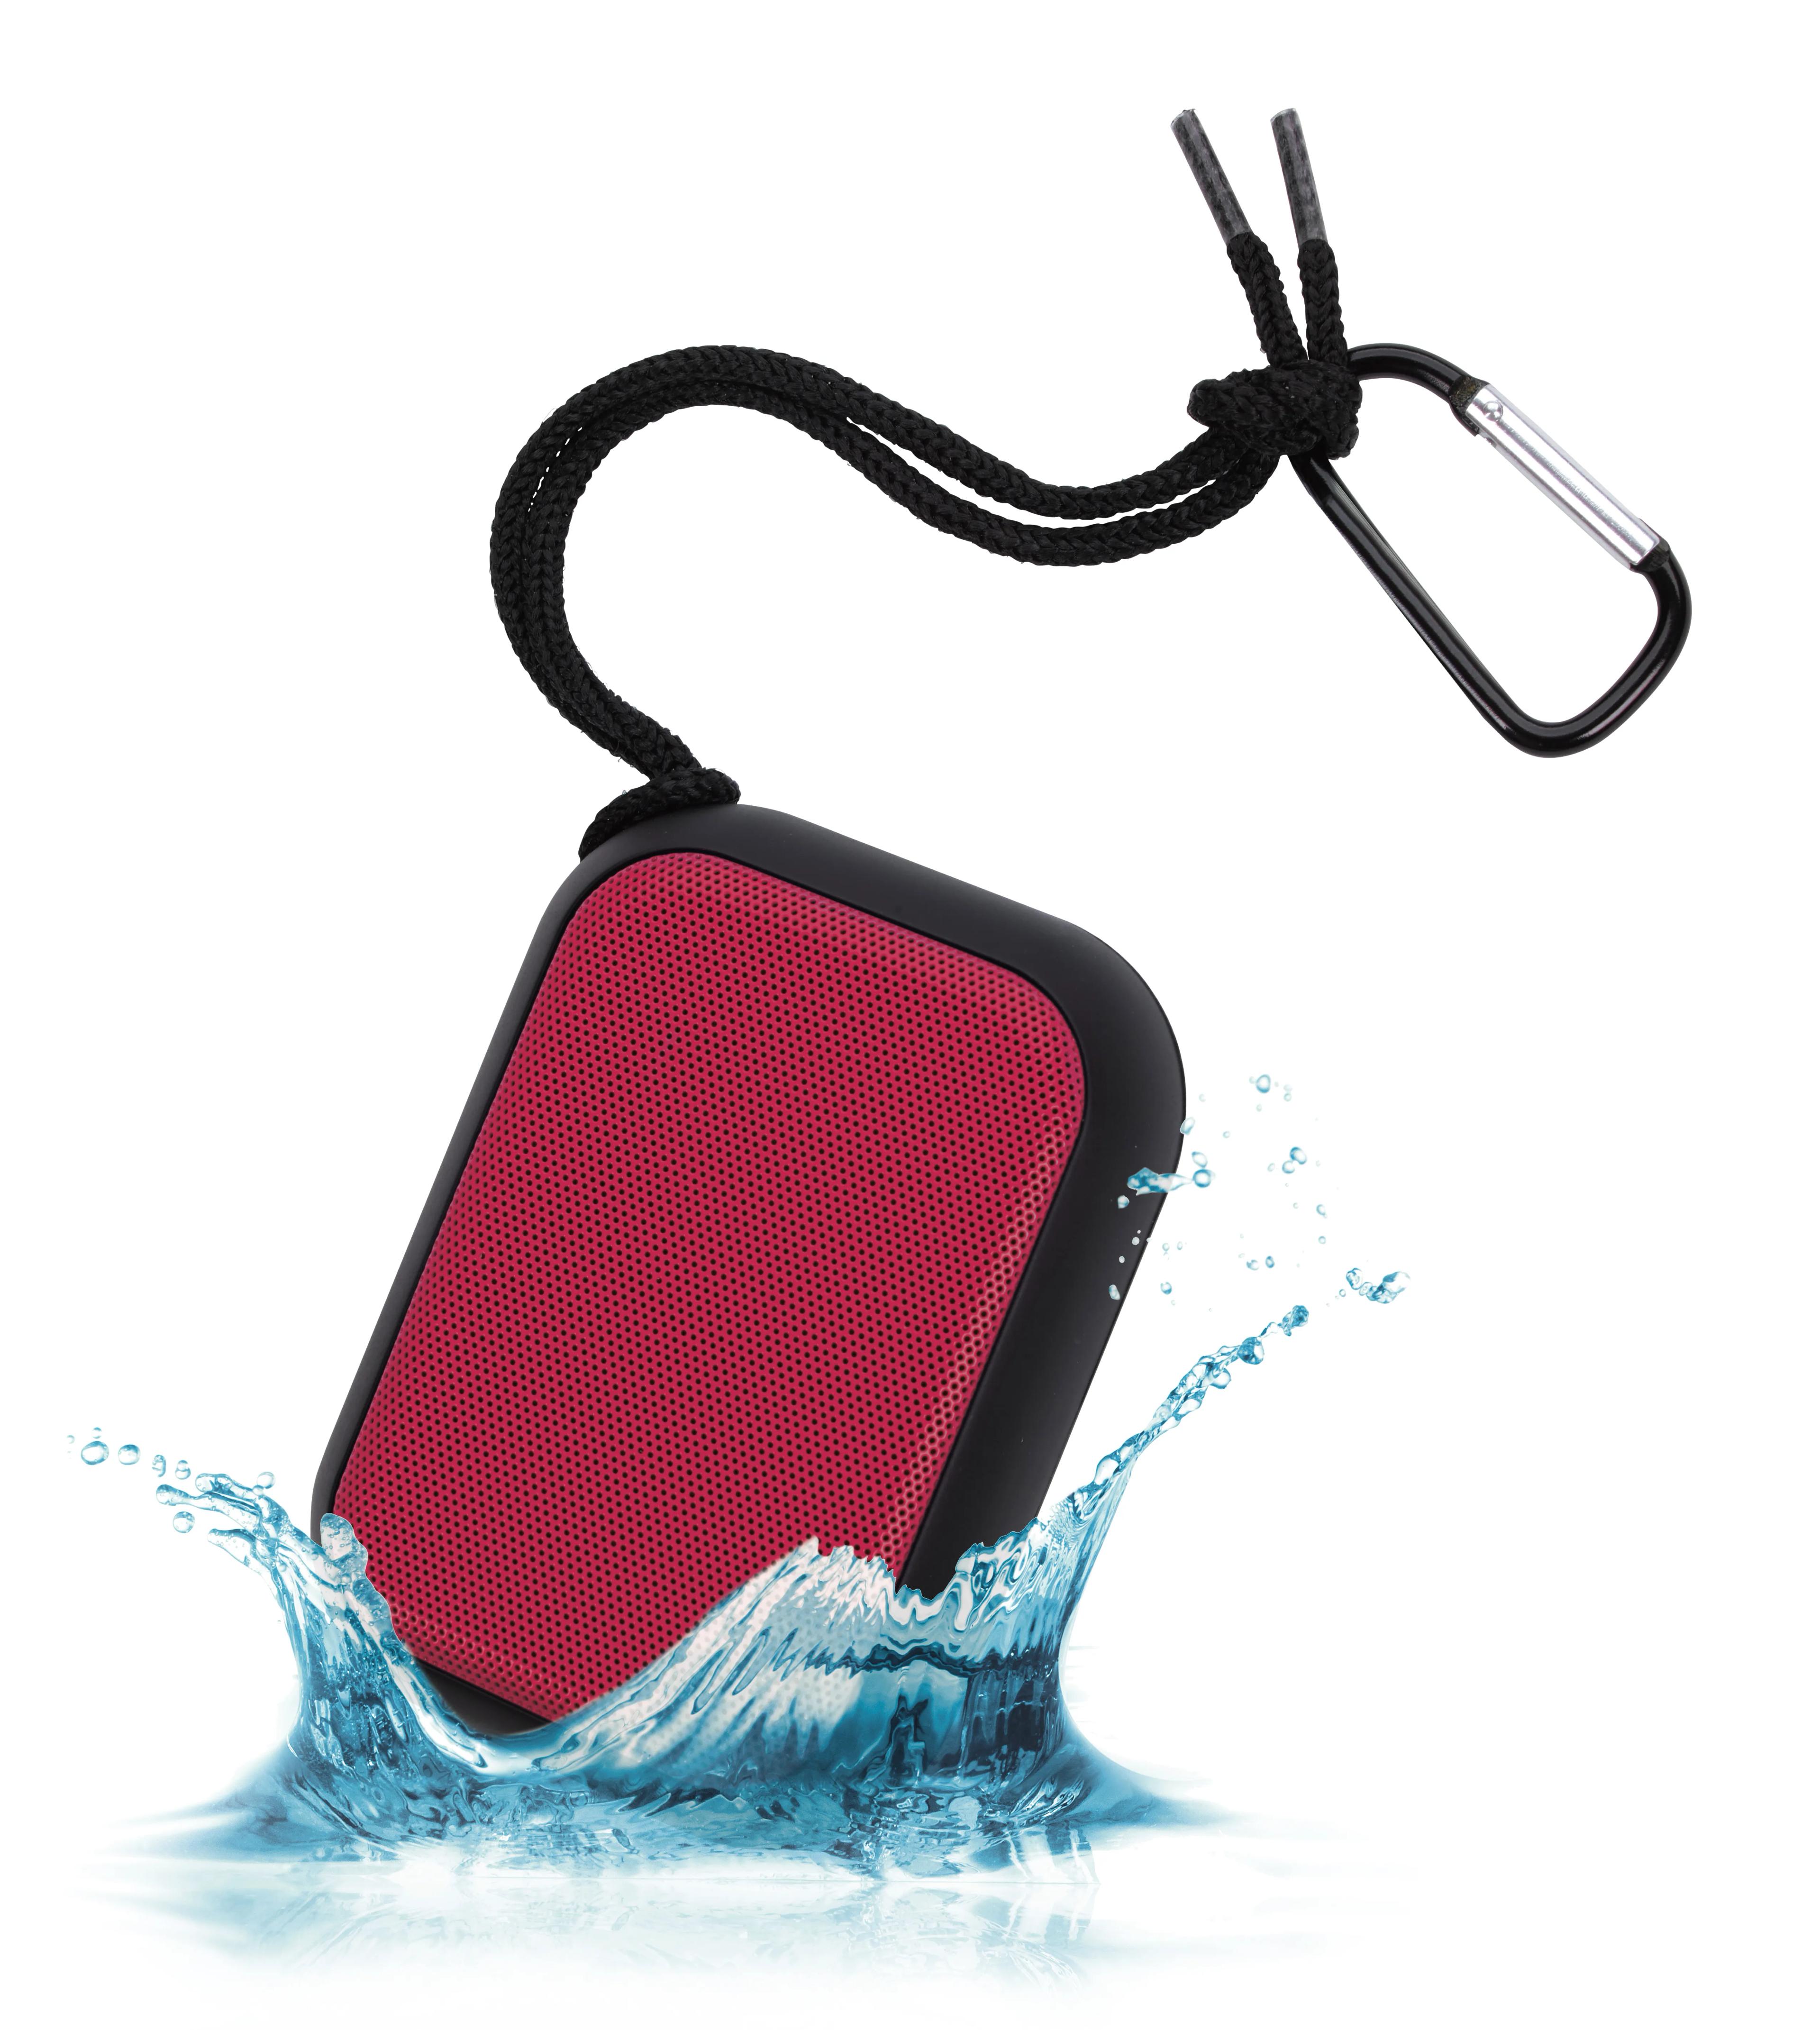 Travel-Size Water-resistant Bluetooth® Speaker 17 of 22